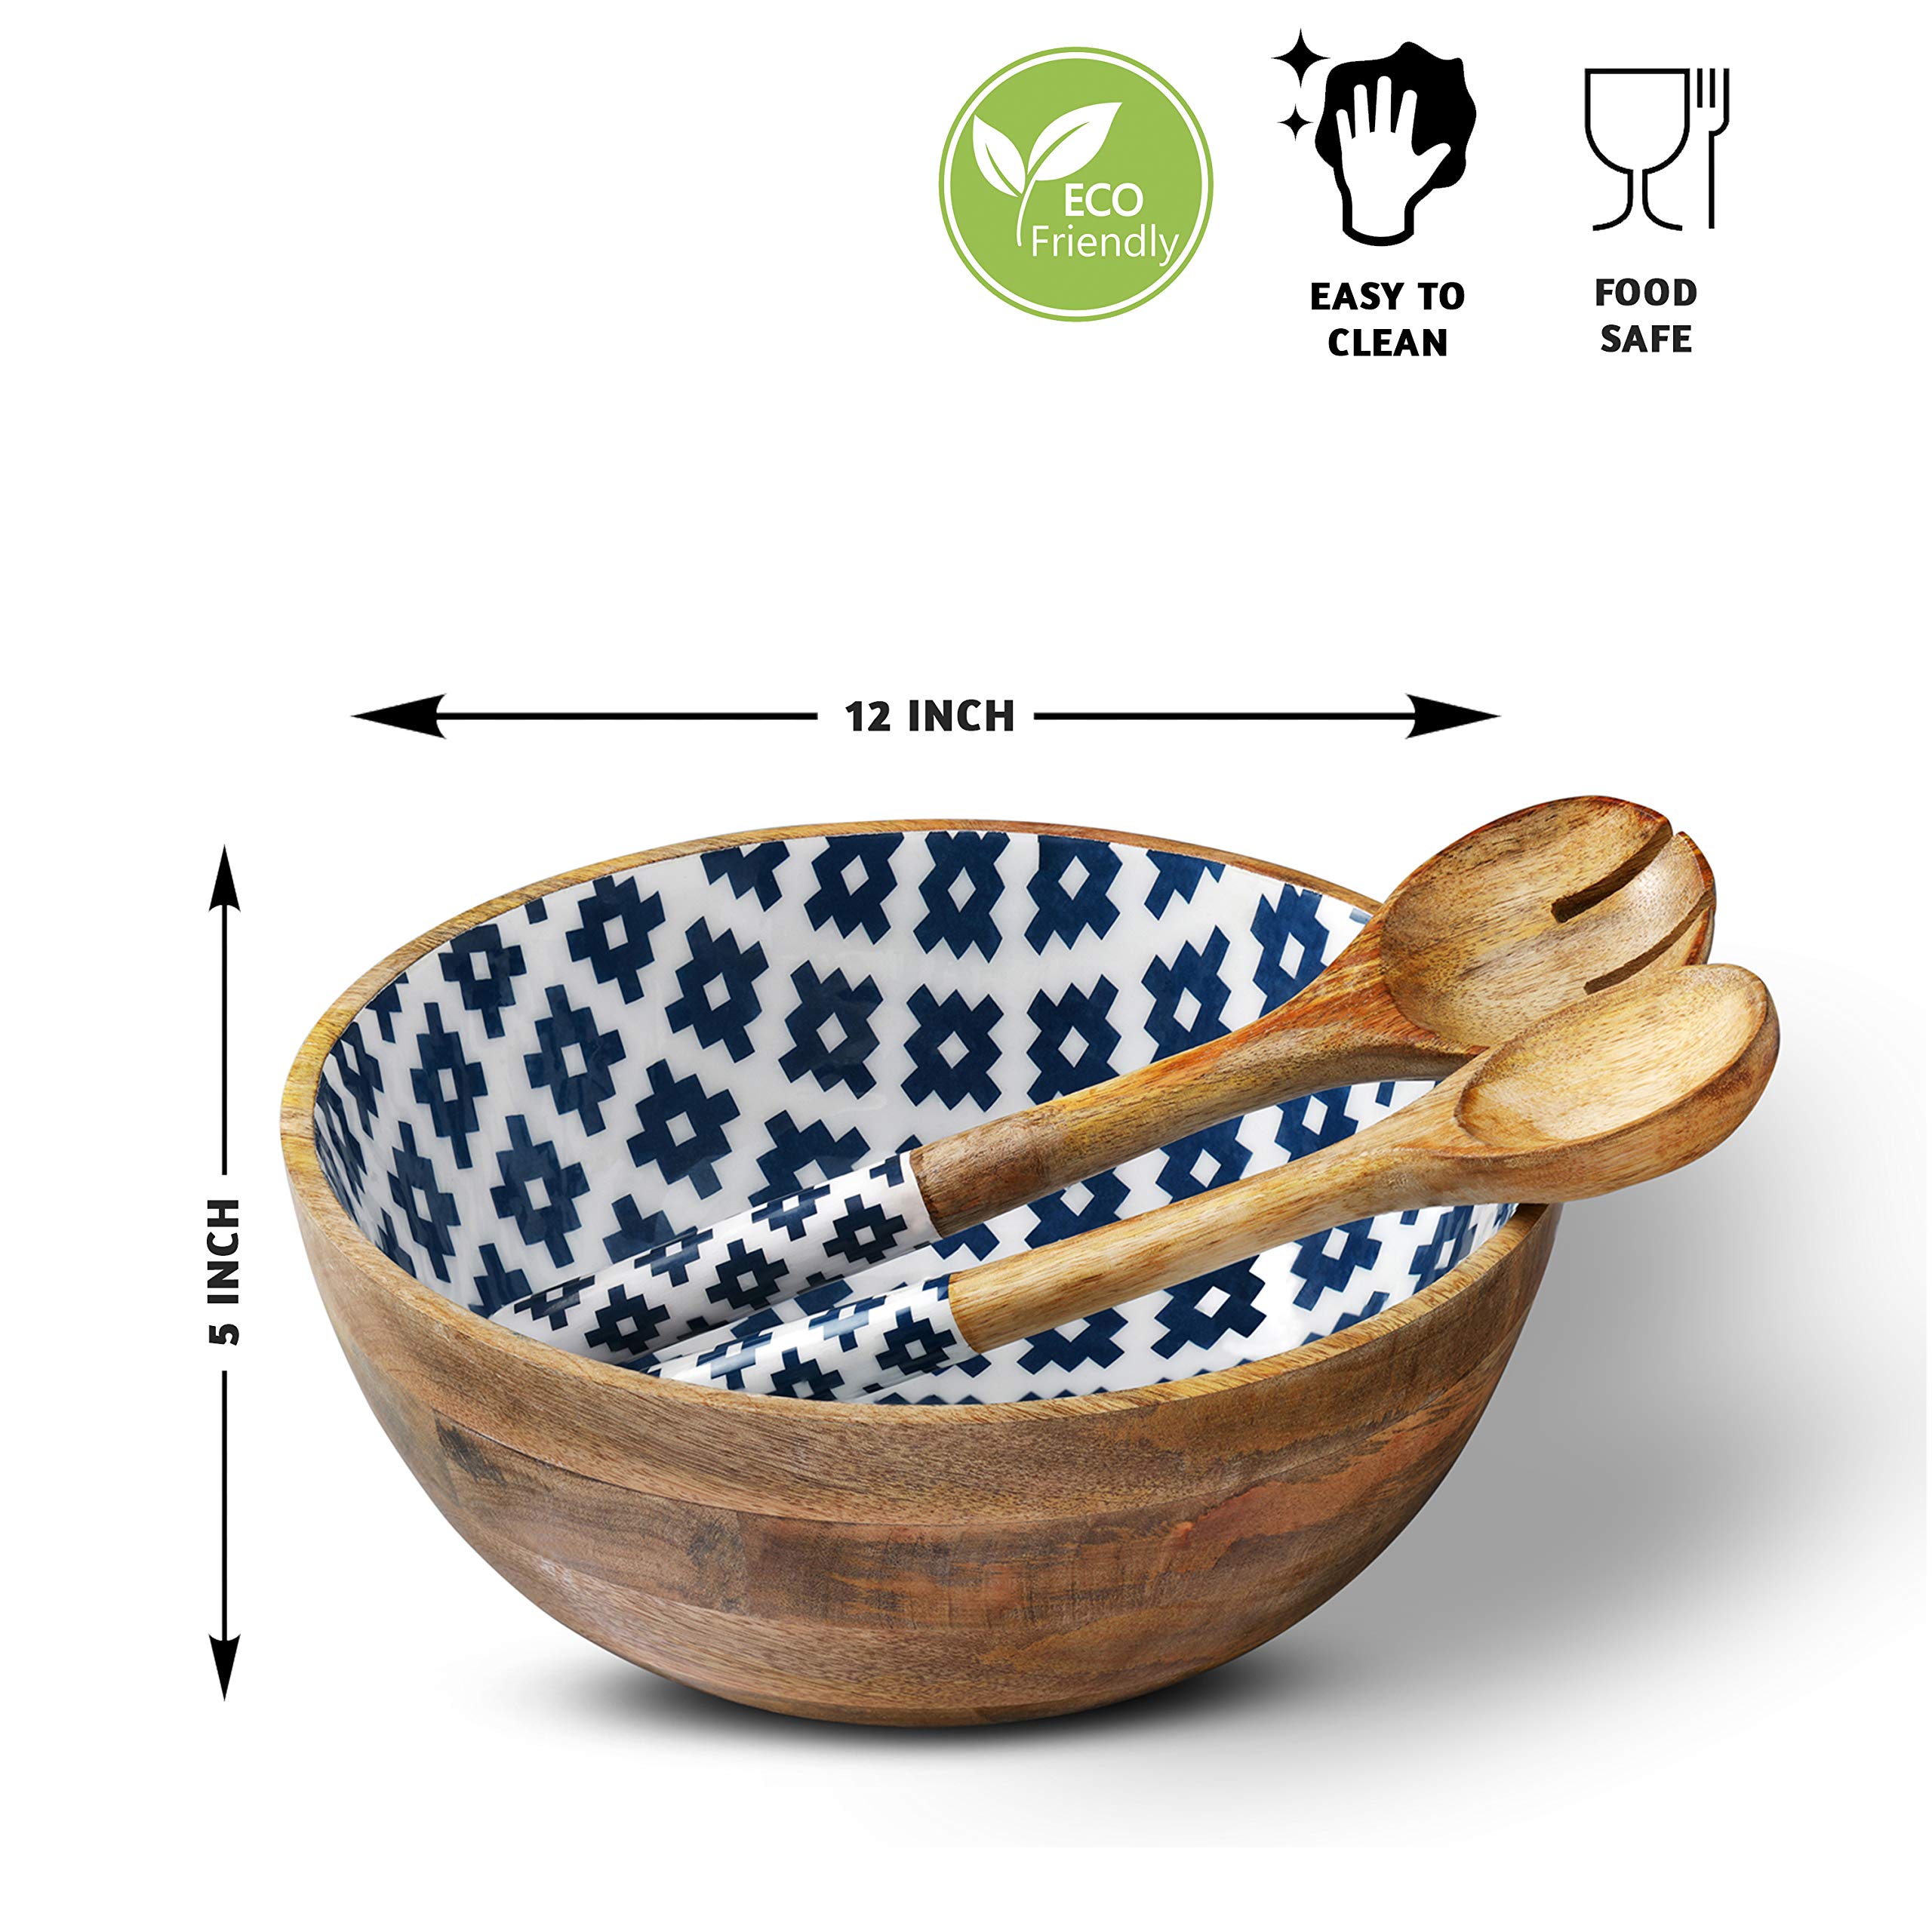 Folkulture Salad Bowl or Wooden Bowls with Serving Tongs, Large for Fruits, Cereal or Pasta, Large Mixing Bowl Set, 12" Diameter x 5" Height, Mango Wood, Blue